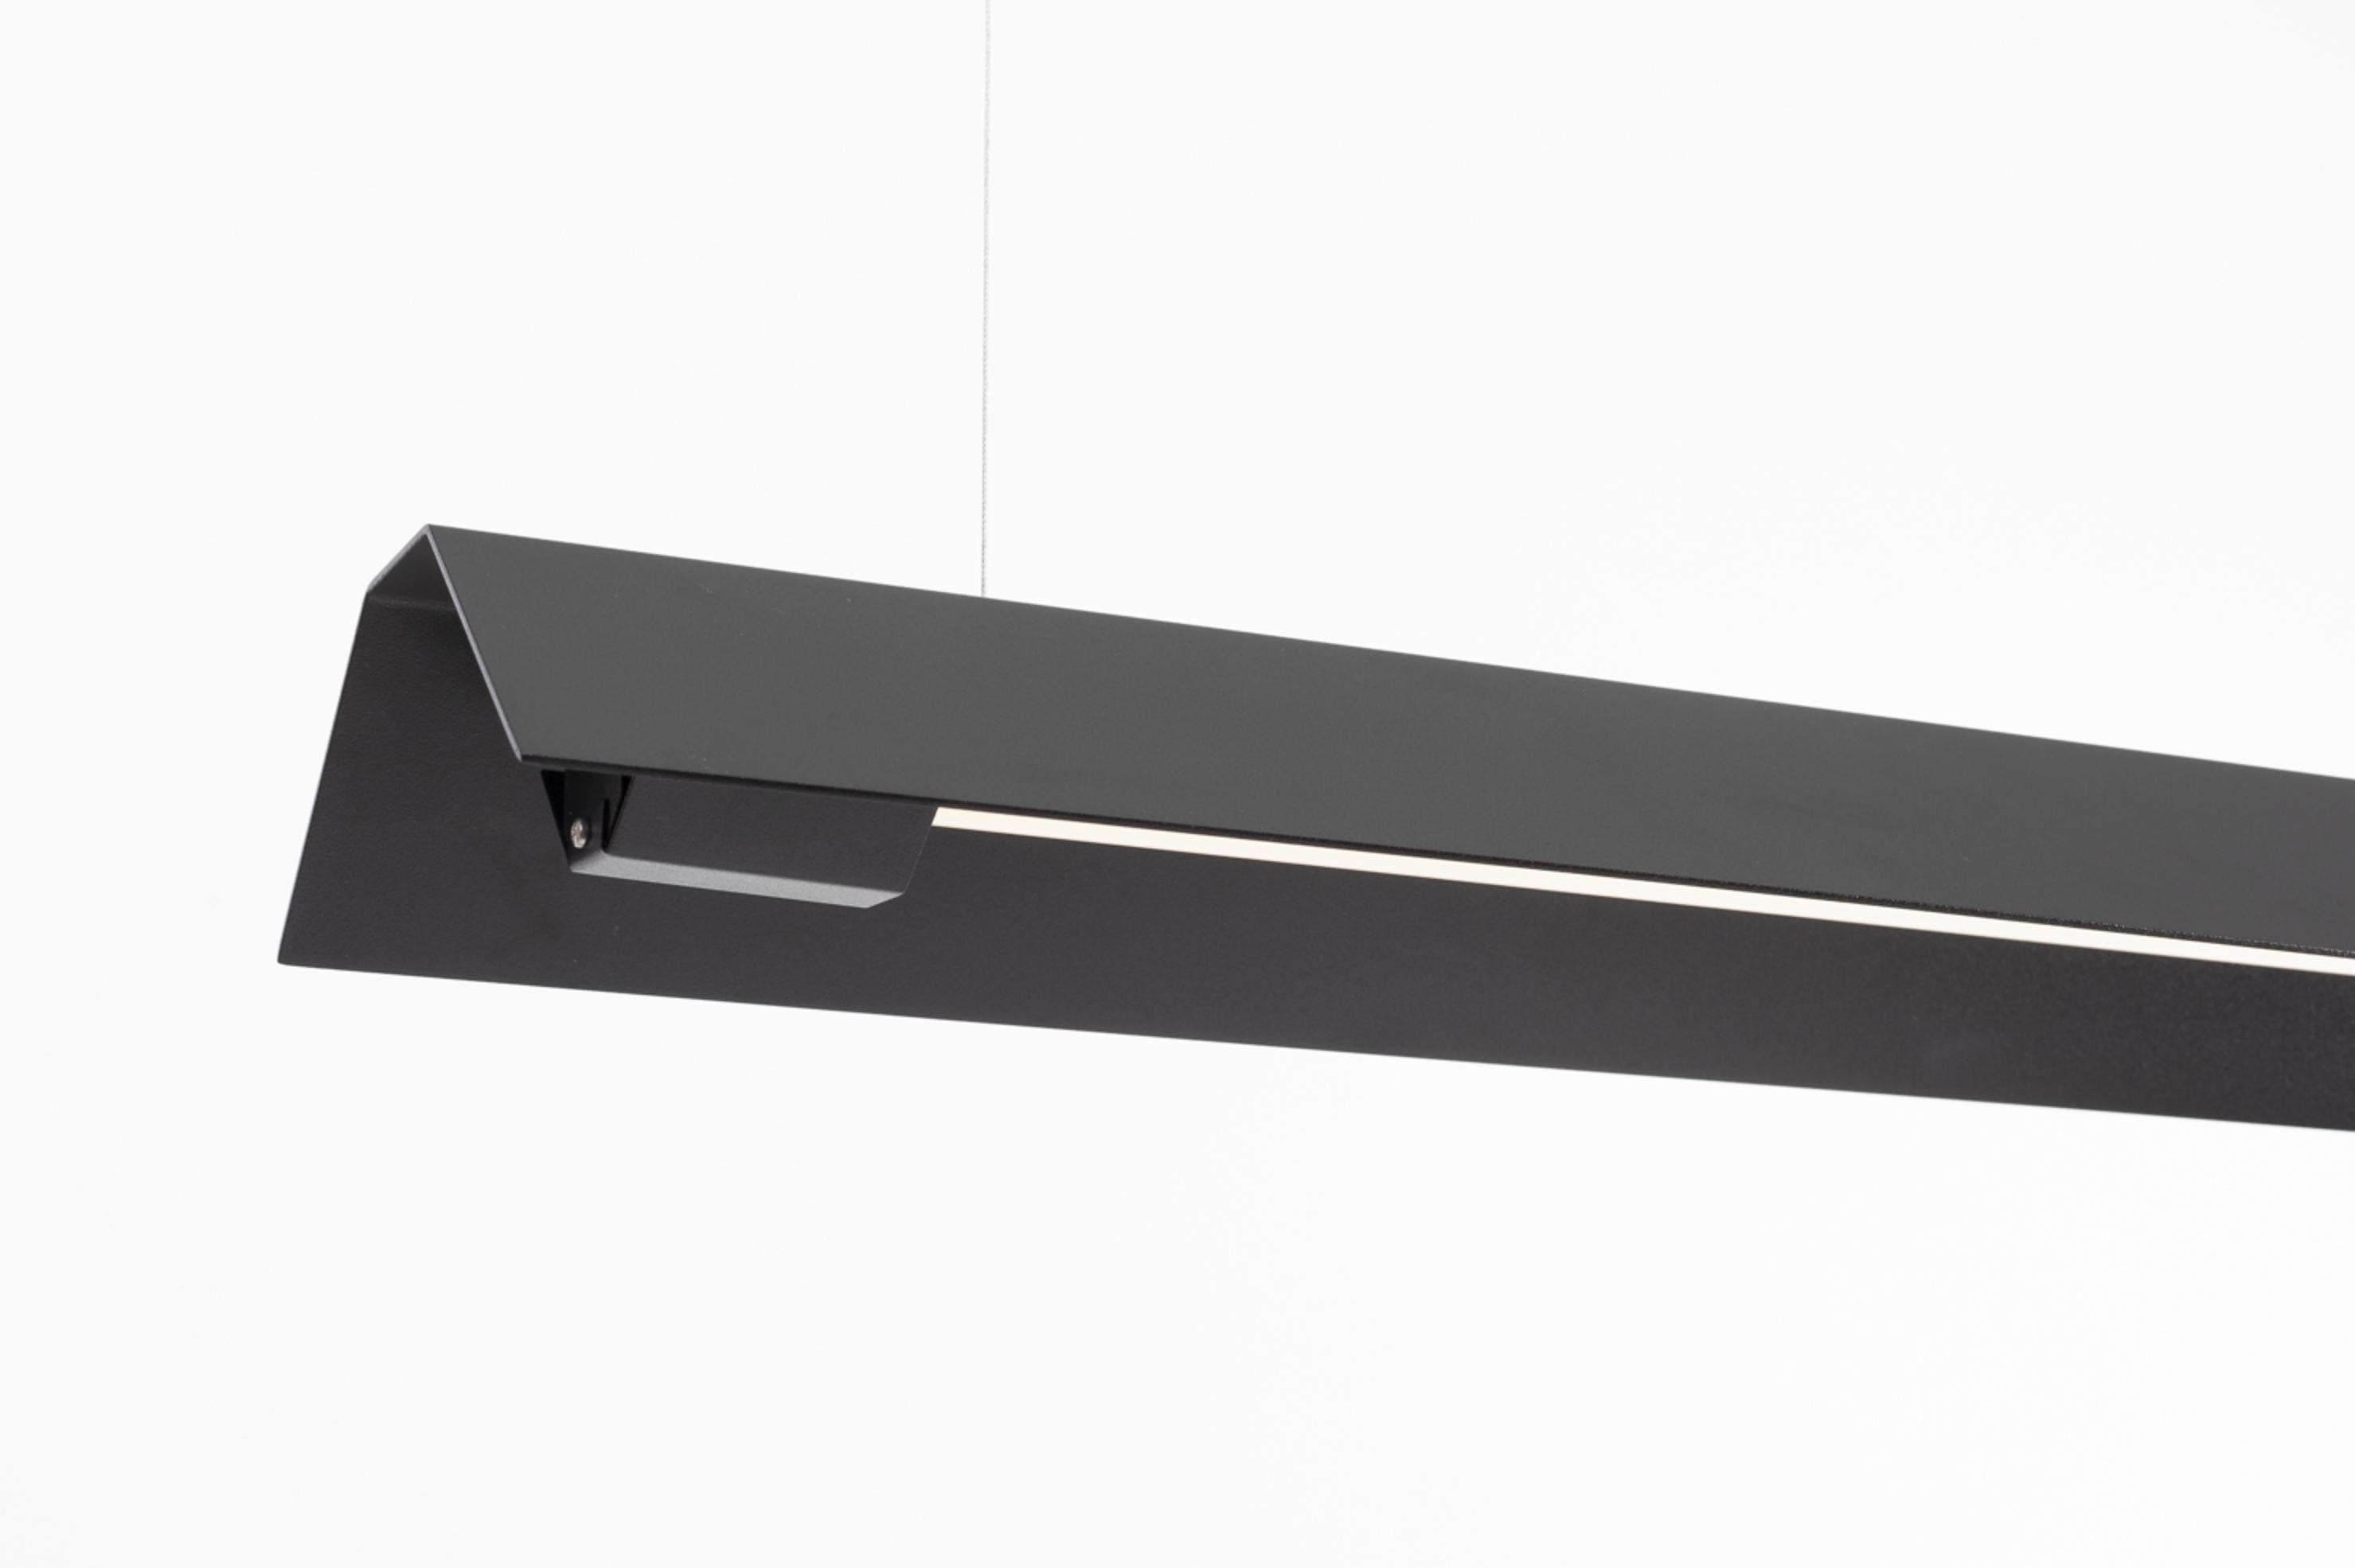 Large Misalliance Ral Jet Black Suspended Light by Lexavala
Dimensions: D 16 x W 130 x H 8 cm
Materials: powder coated aluminium.

There are two lenghts of socket covers, extending over the LED. Two short are to be found in Suspended and